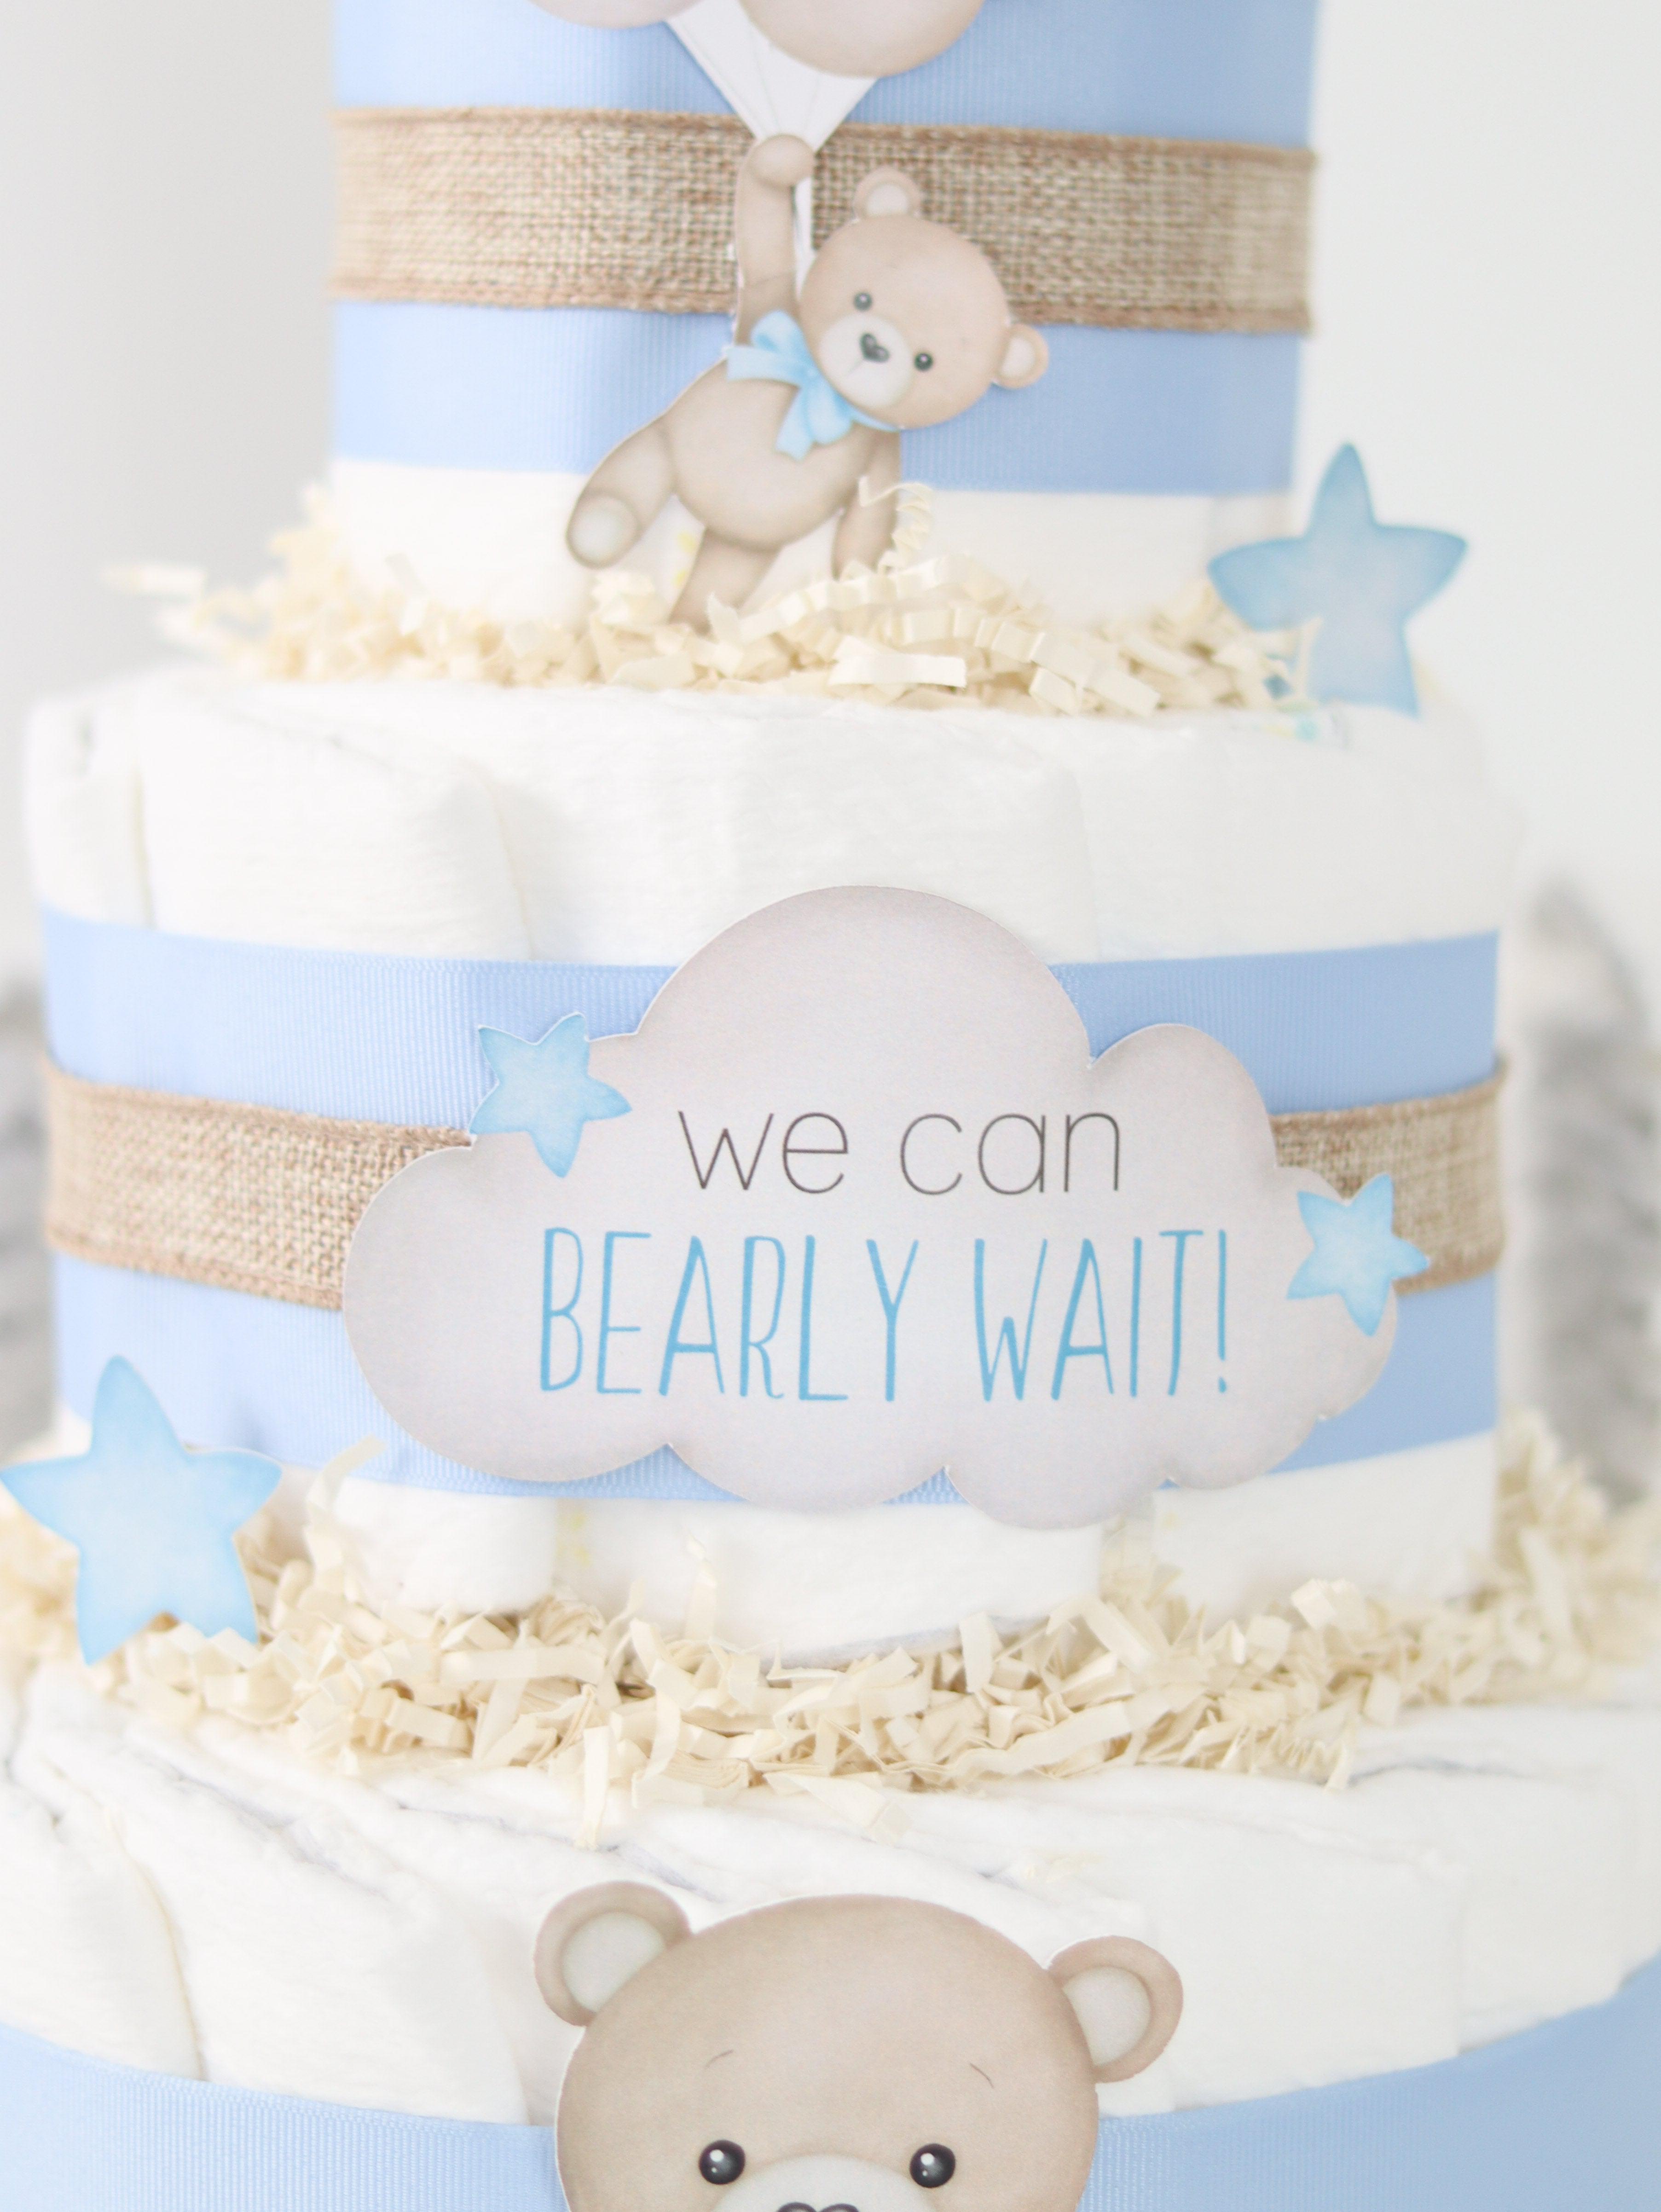 We Can Bearly Wait too Adorable baby shower cake featuring acrylics by  kakesnstuffboutique kakesnstuff Teddy figurines pattycakesny   Instagram